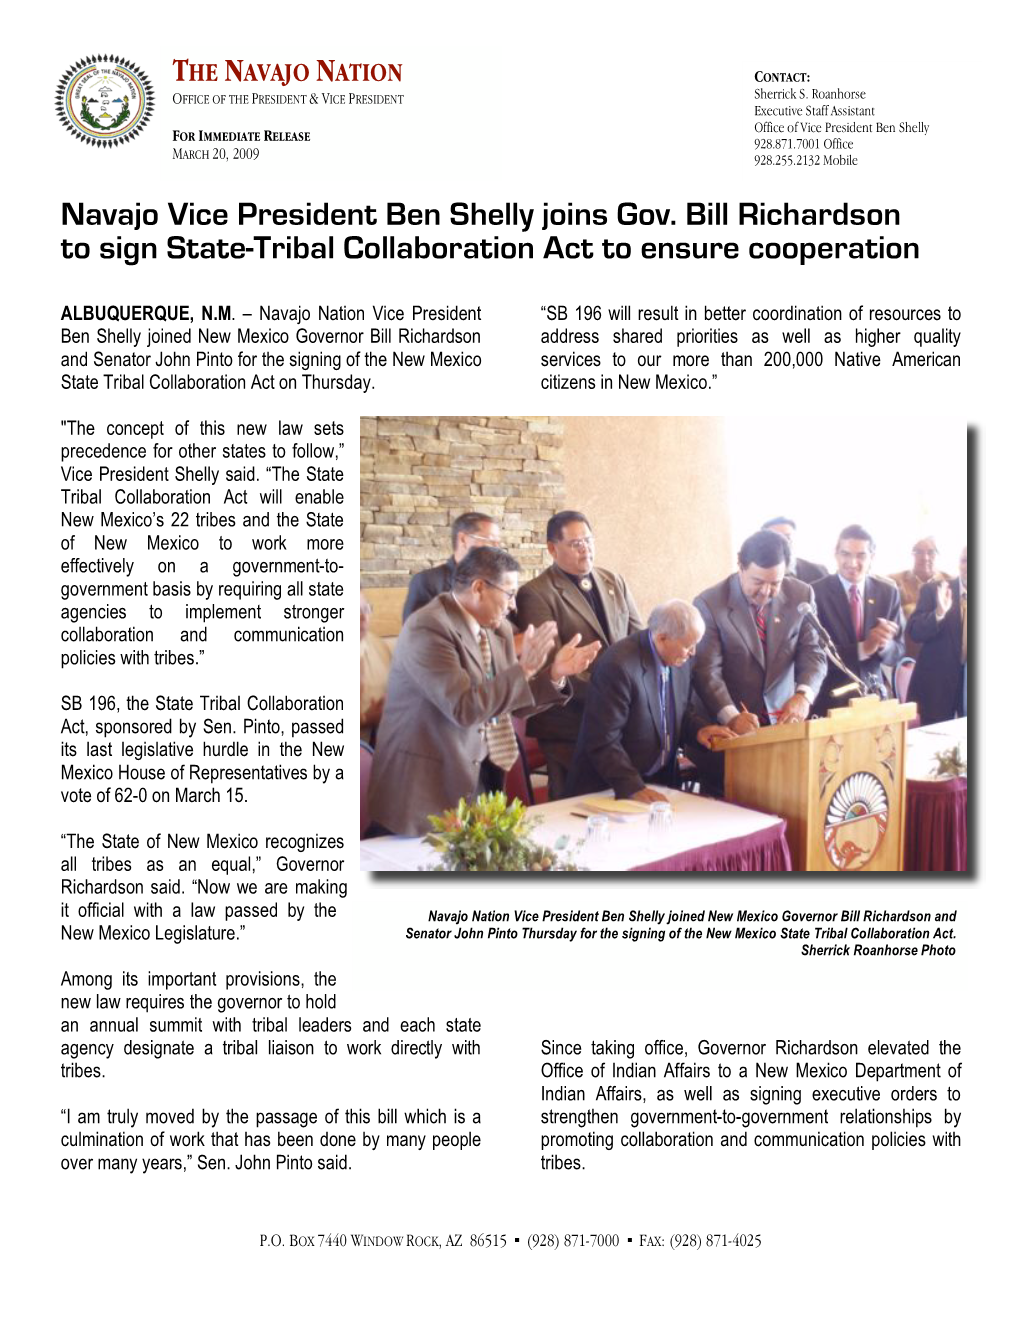 Navajo Vice President Joins Governor for Signing of Collaboration Law, For